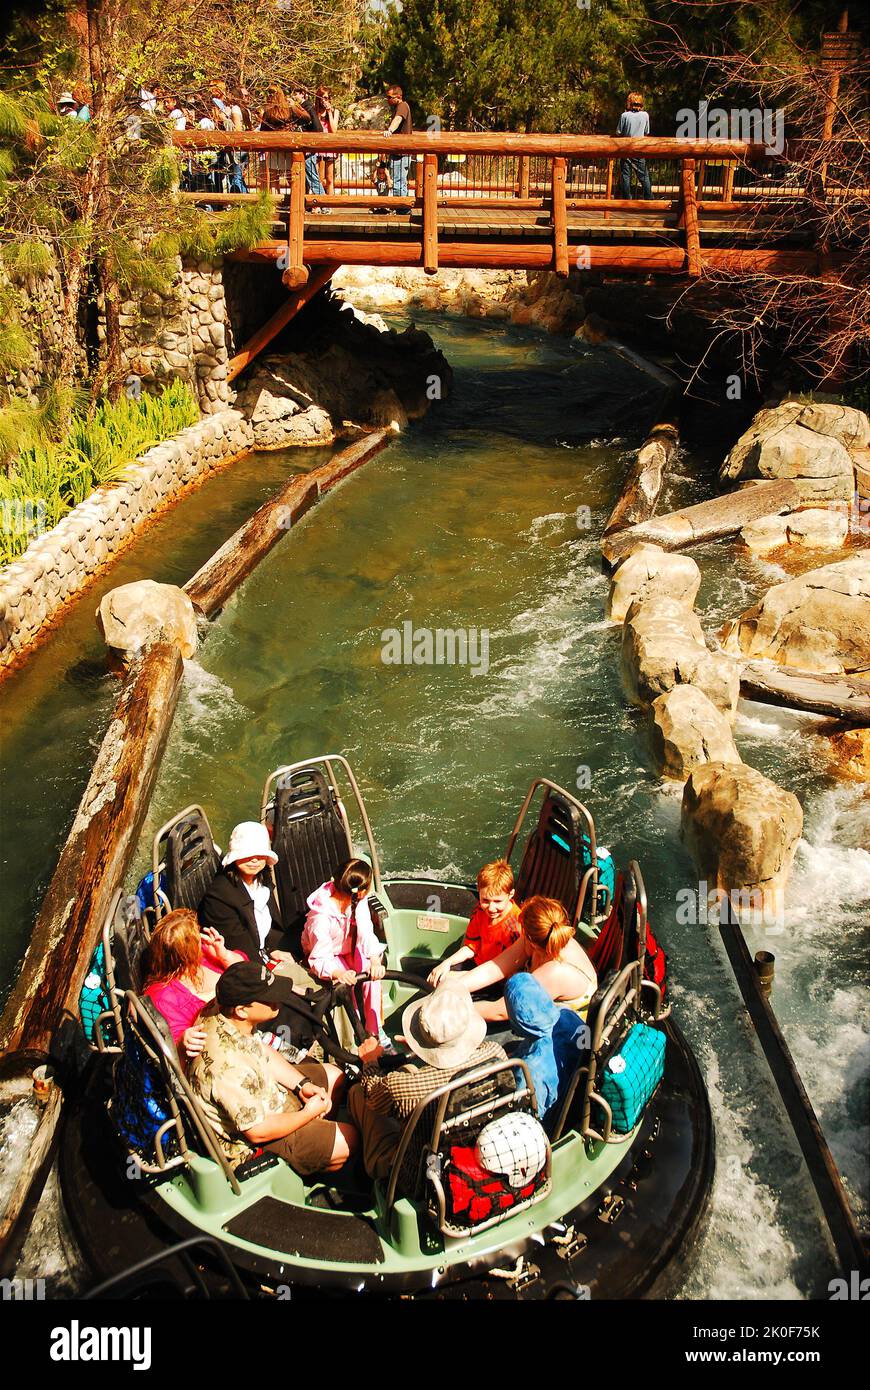 A family is soaked after experiencing the Grizzly River Run water ride at California Adventure in Disneyland Stock Photo